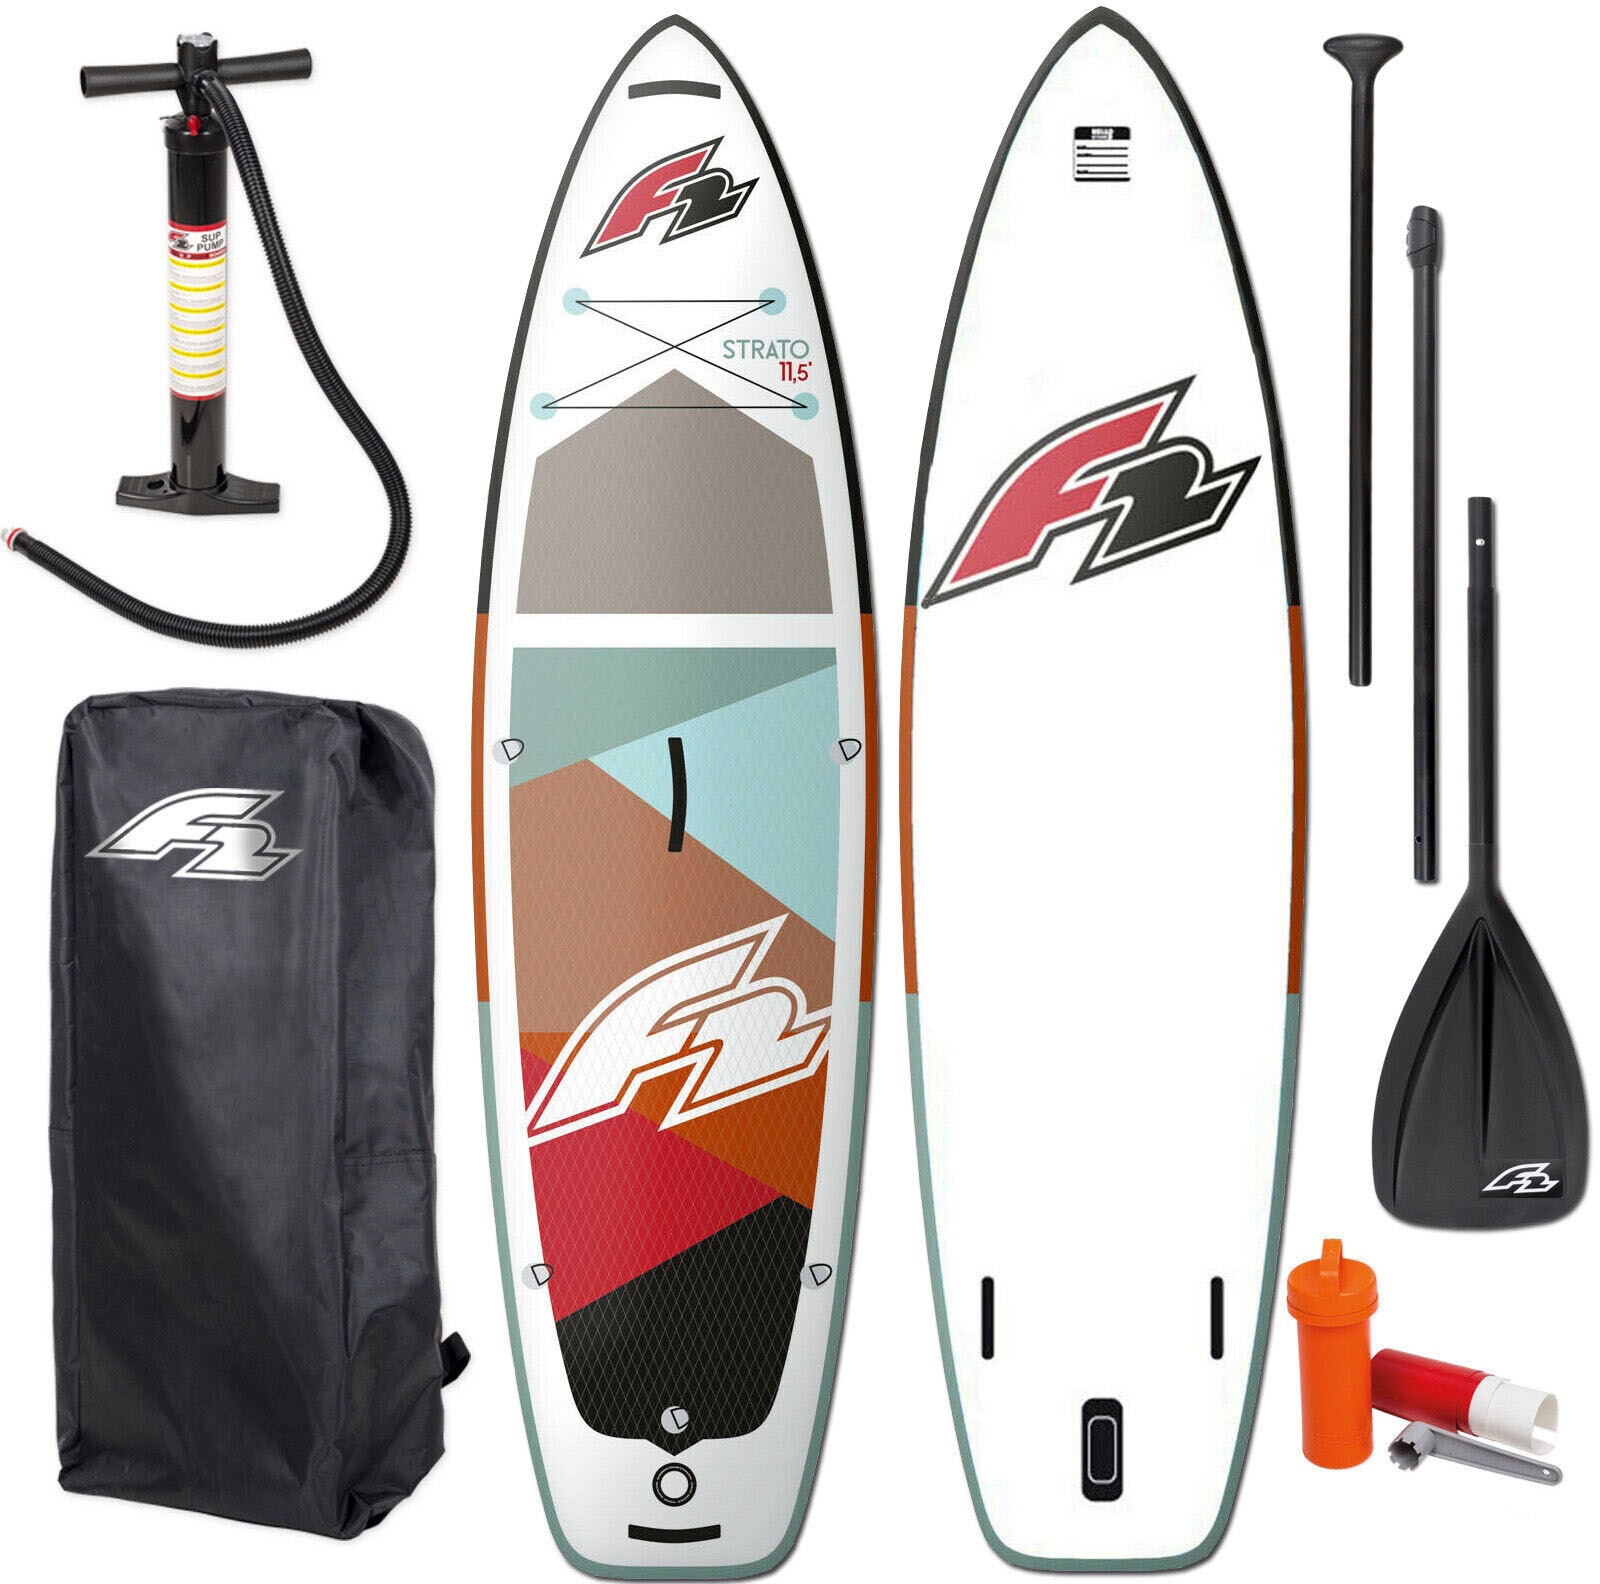 F2 Inflatable SUP-Board »Strato women 10,5 red«, (Packung, 5 tlg.) kaufen  im OTTO Online Shop